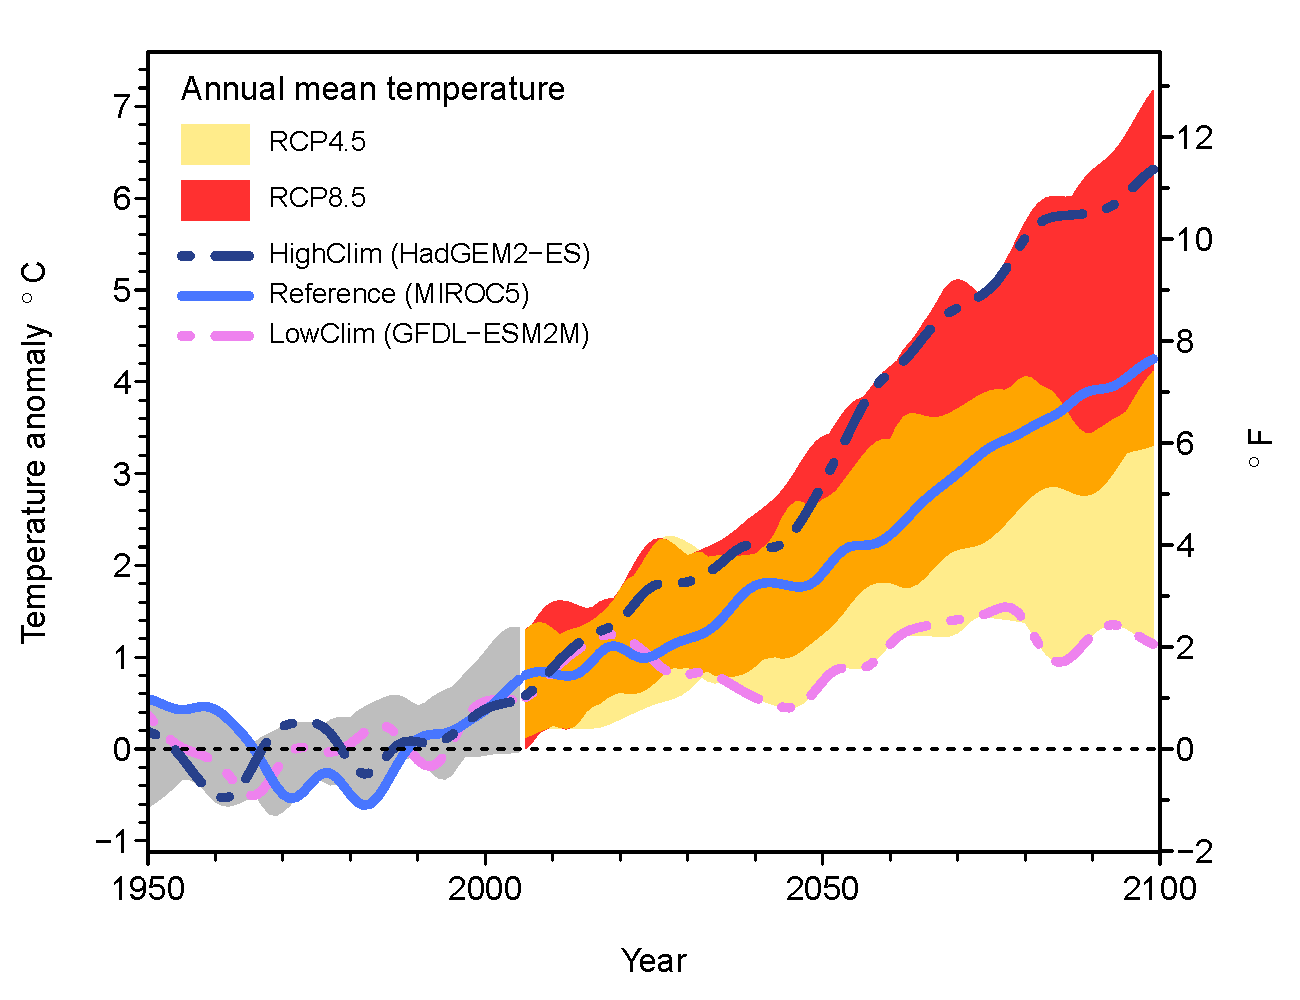 Differences in annual temperature for 1950-2100 from a historical baseline (mean of 1950-2005).